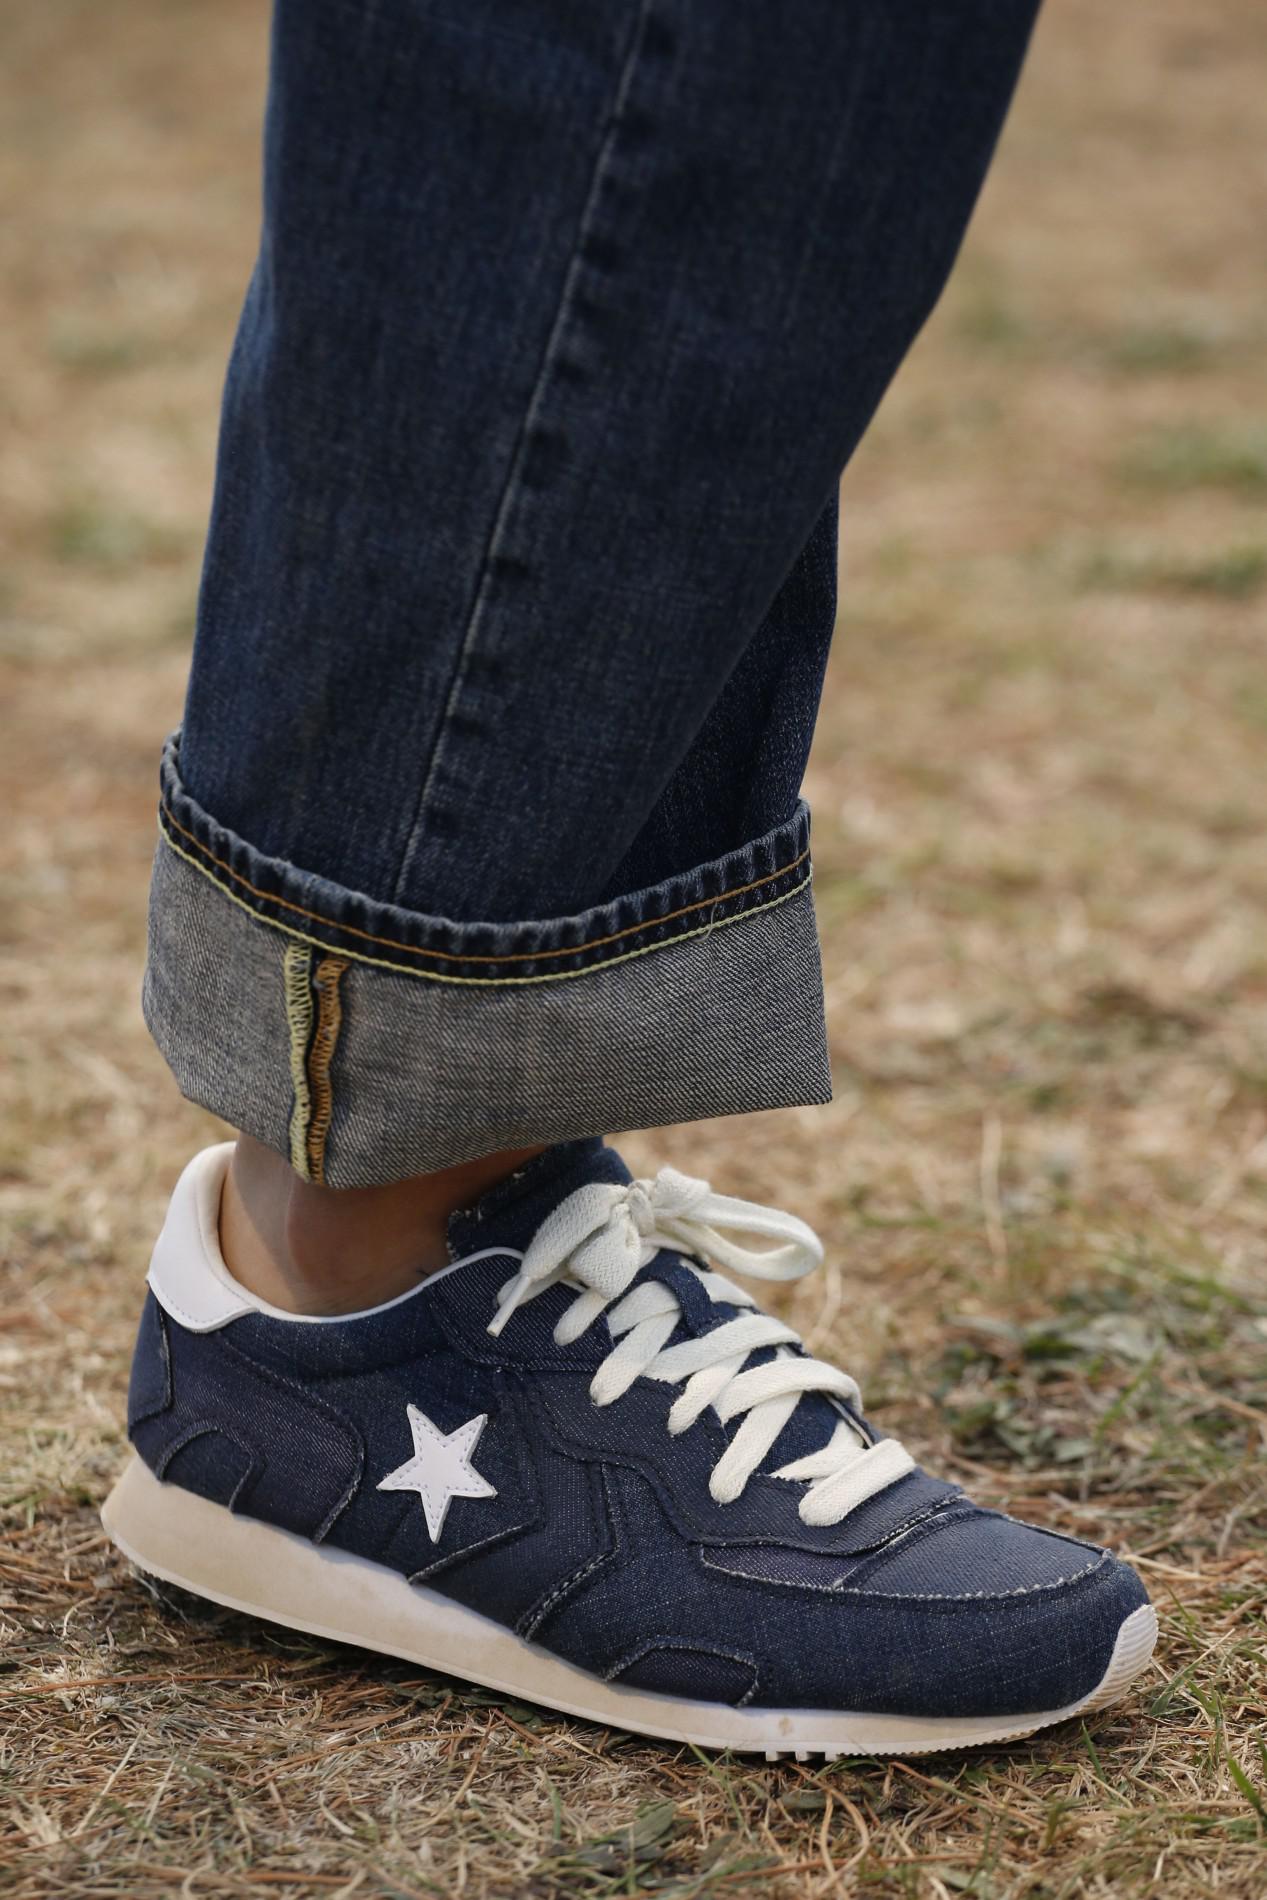 converse jeans mens Online Shopping for Women, Men, Kids Fashion &  Lifestyle|Free Delivery & Returns! -